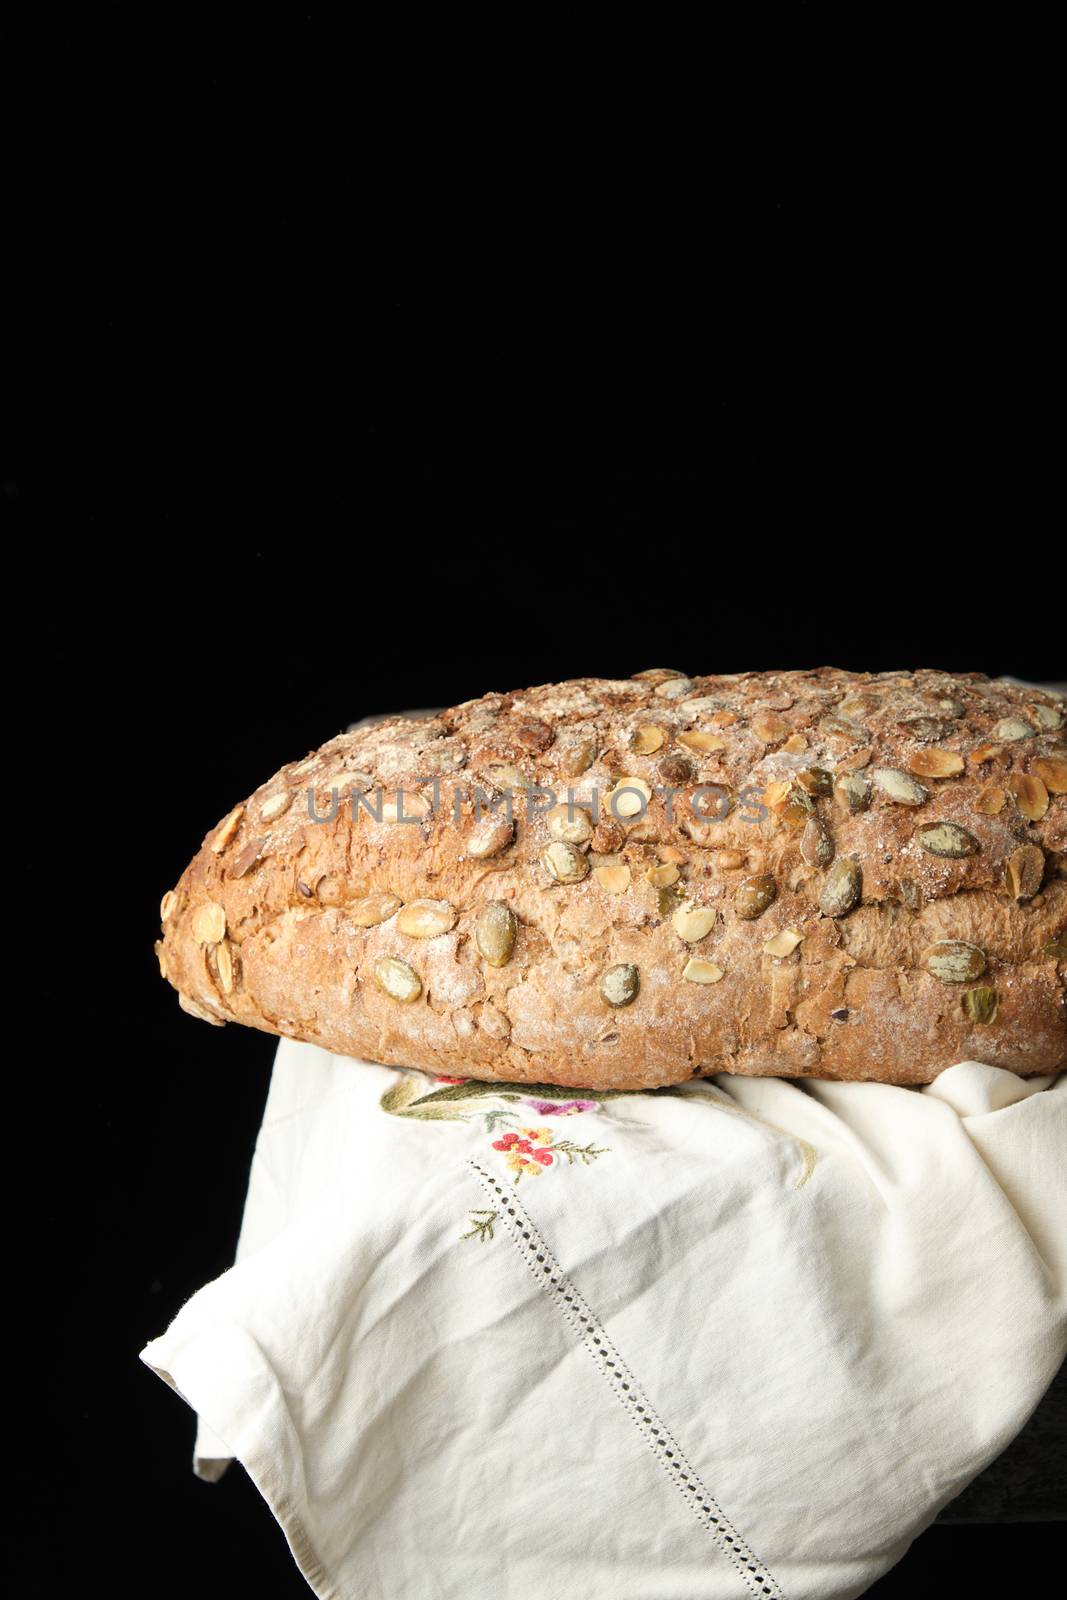 baked oval bread made from rye flour with pumpkin seeds on a white linen napkin, black  background 